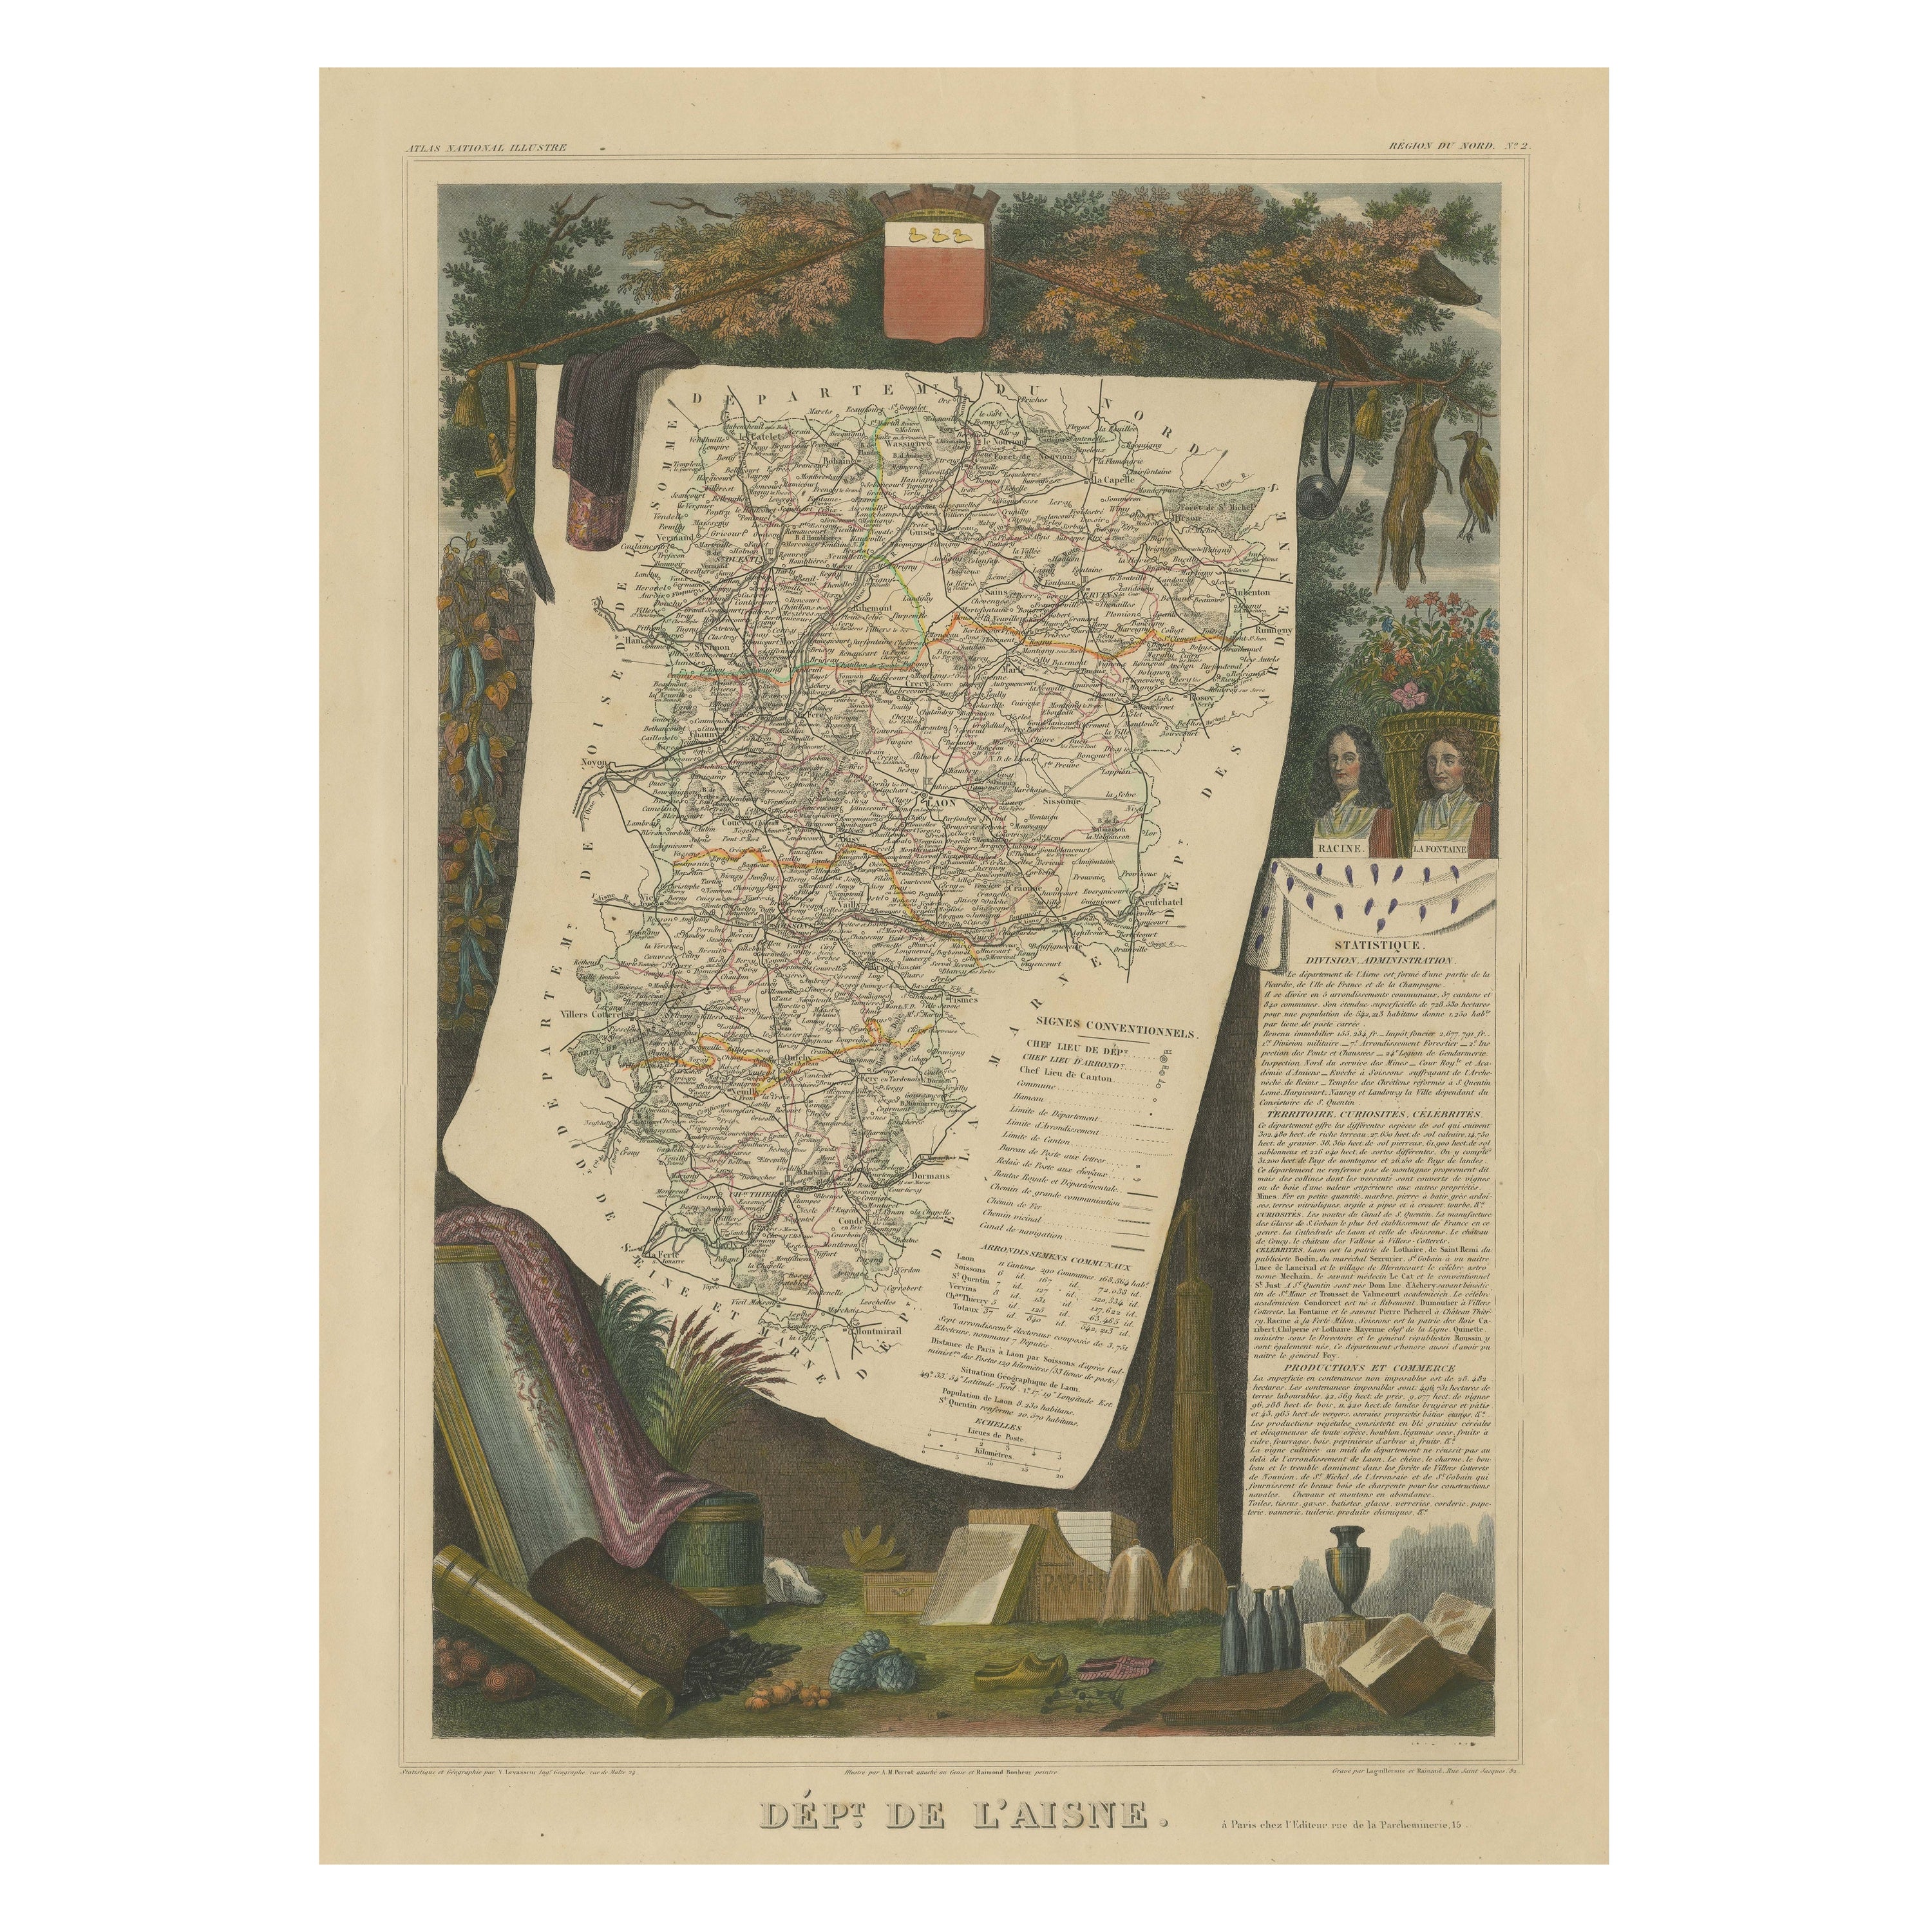 Old Map of the French department of l'Aisne, France For Sale